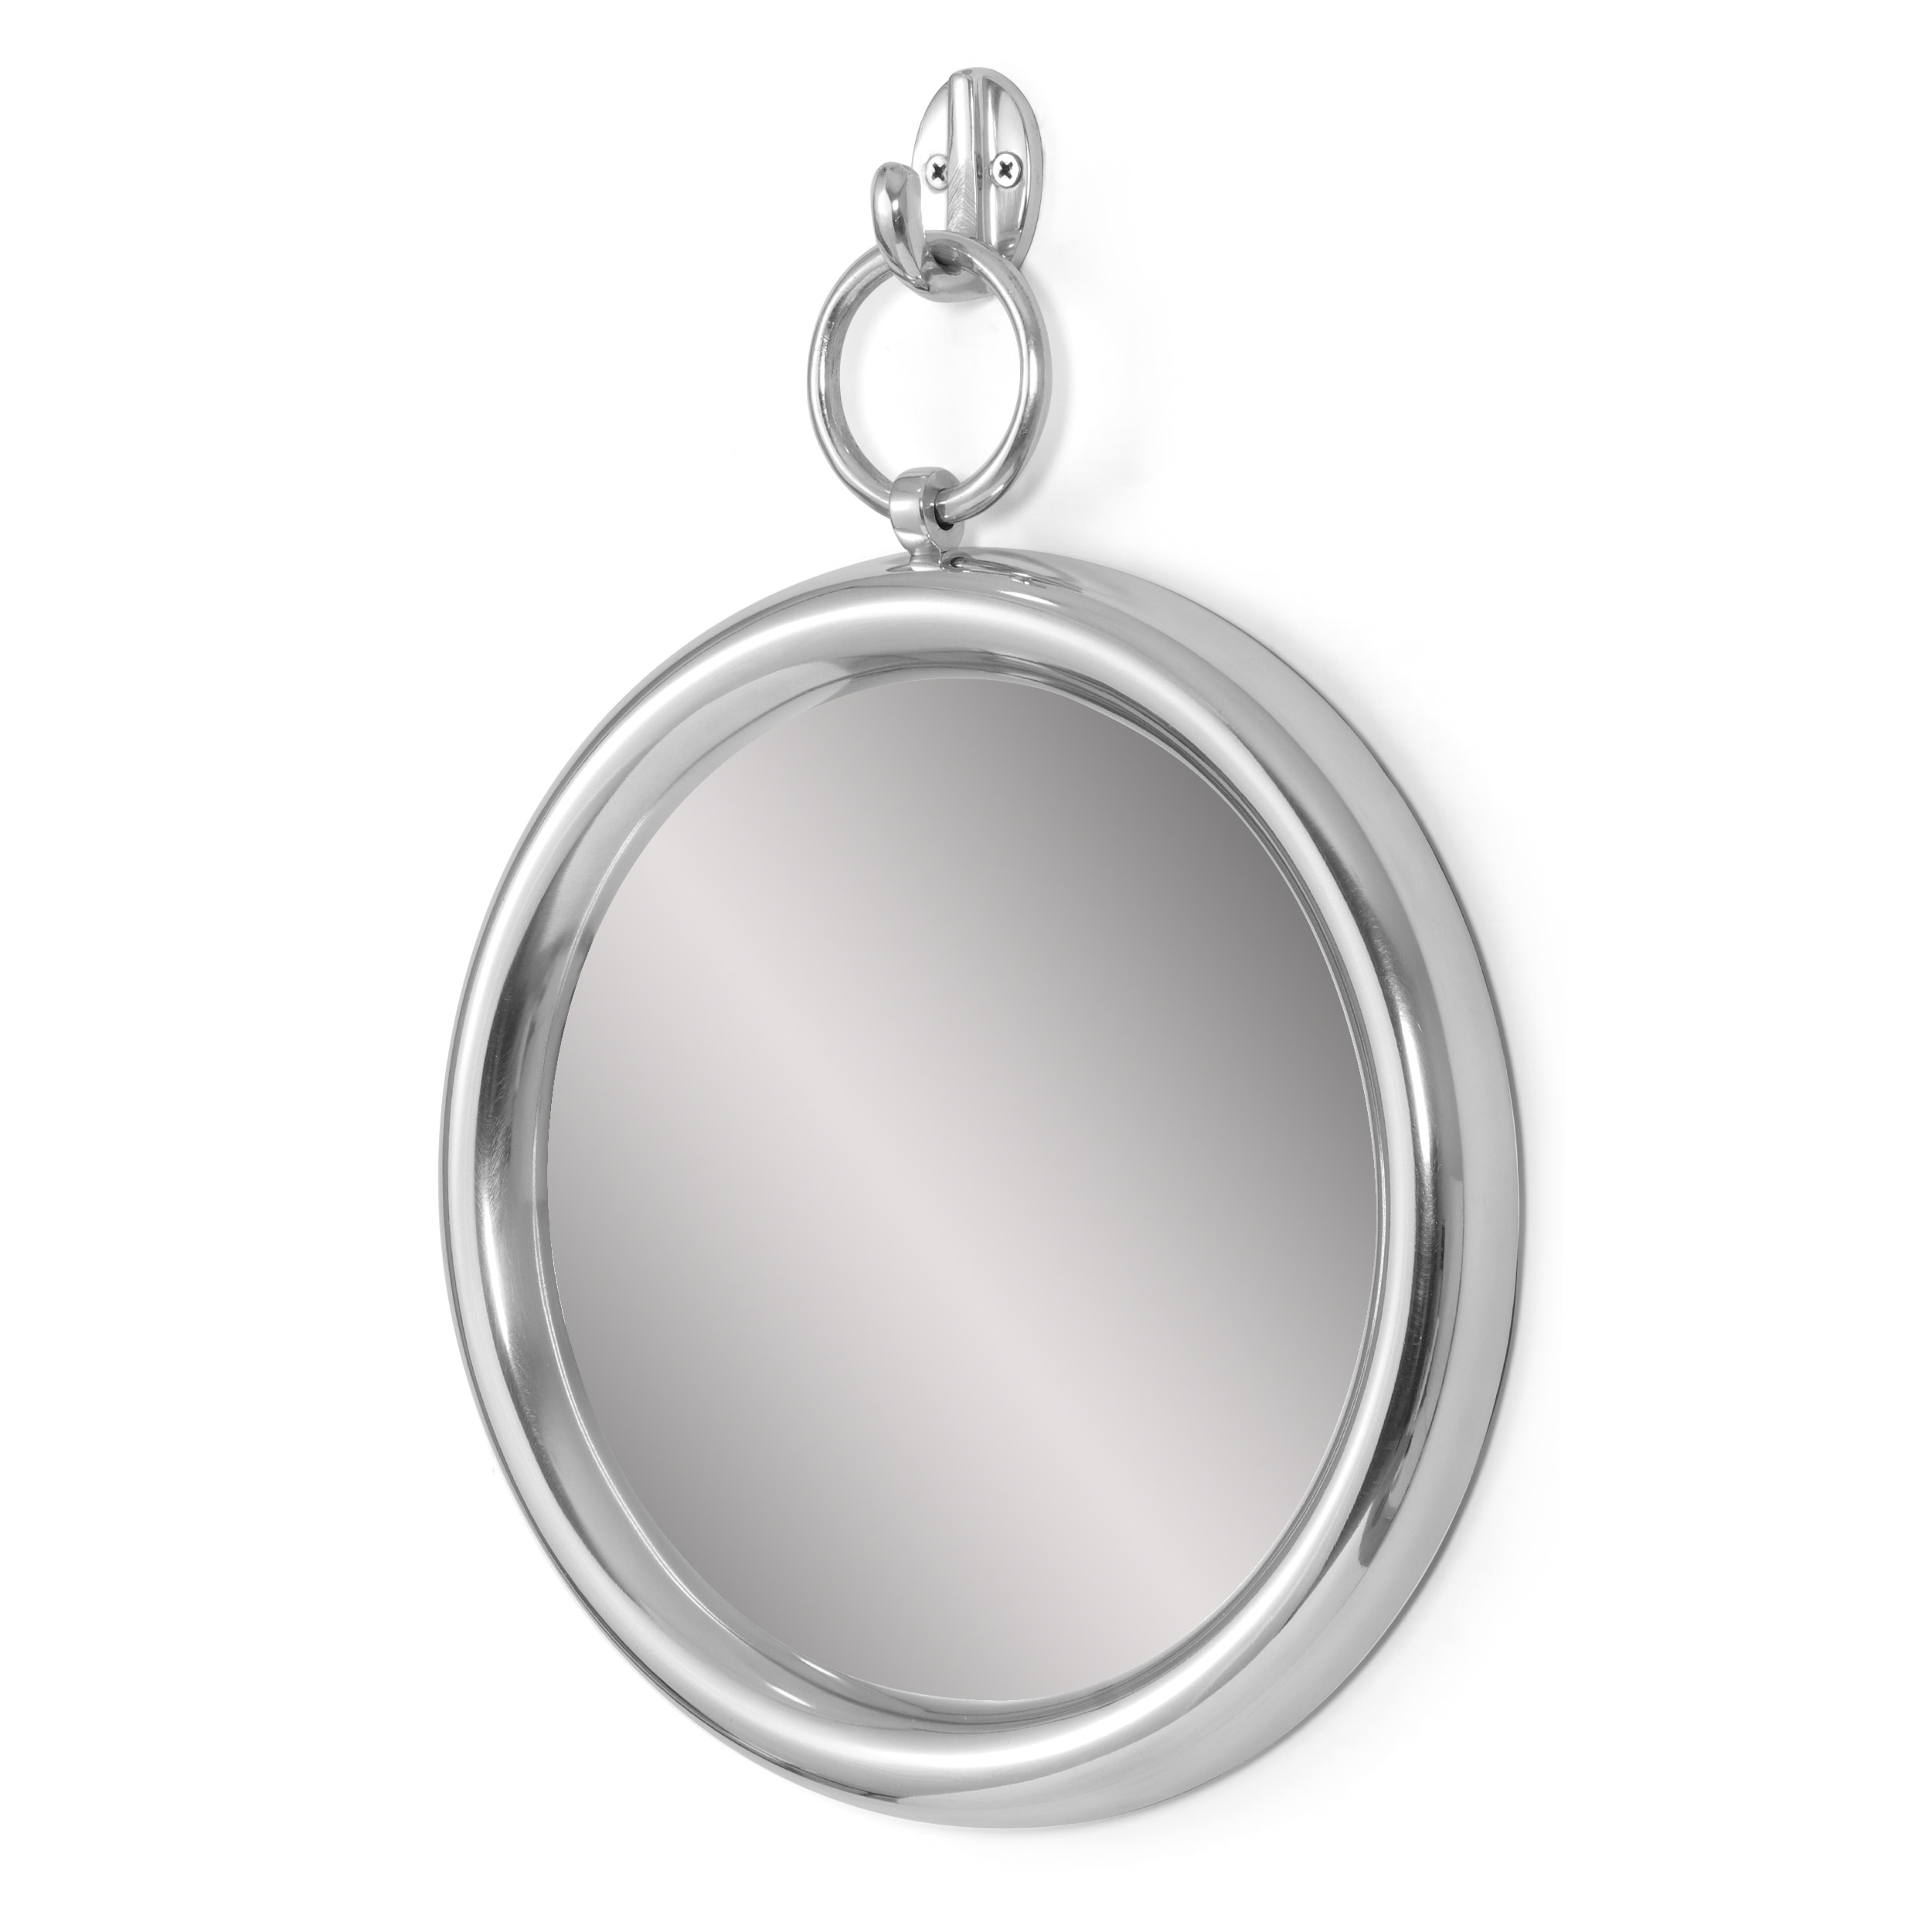 Rumley Modern Handcrafted Round Aluminum Wall Mirror by Christopher Knight Home - 12.00" L x 1.00" W x 15.00" H